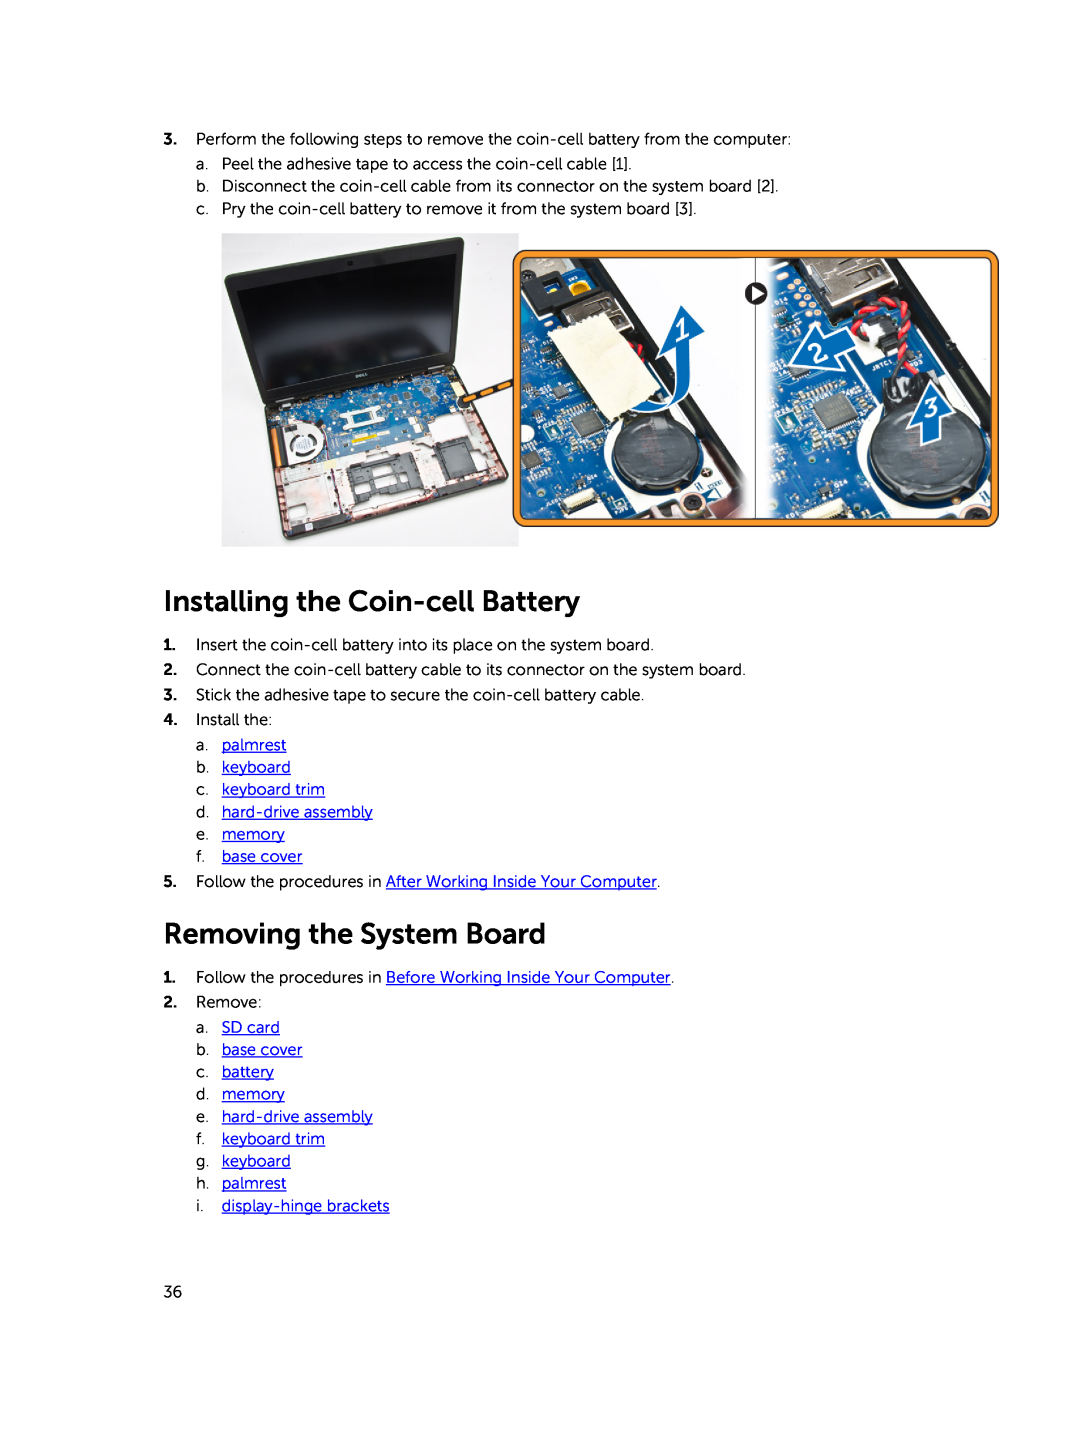 Dell E5450 owner manual Installing the Coin-cell Battery, Removing the System Board 